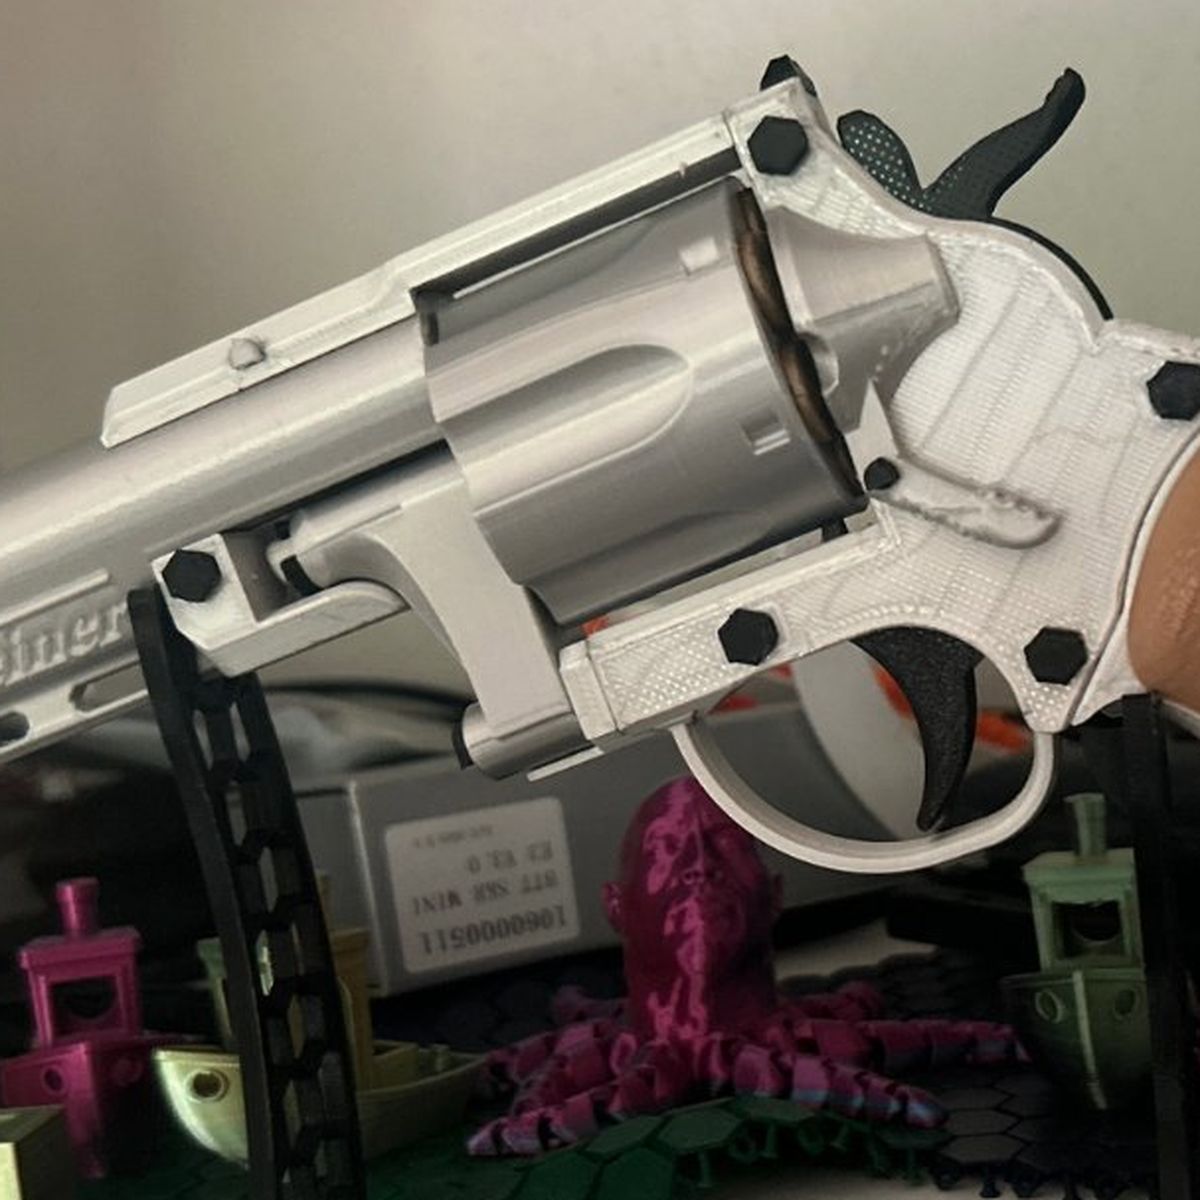 The world's first 3D-printed gun (pictures) - CNET